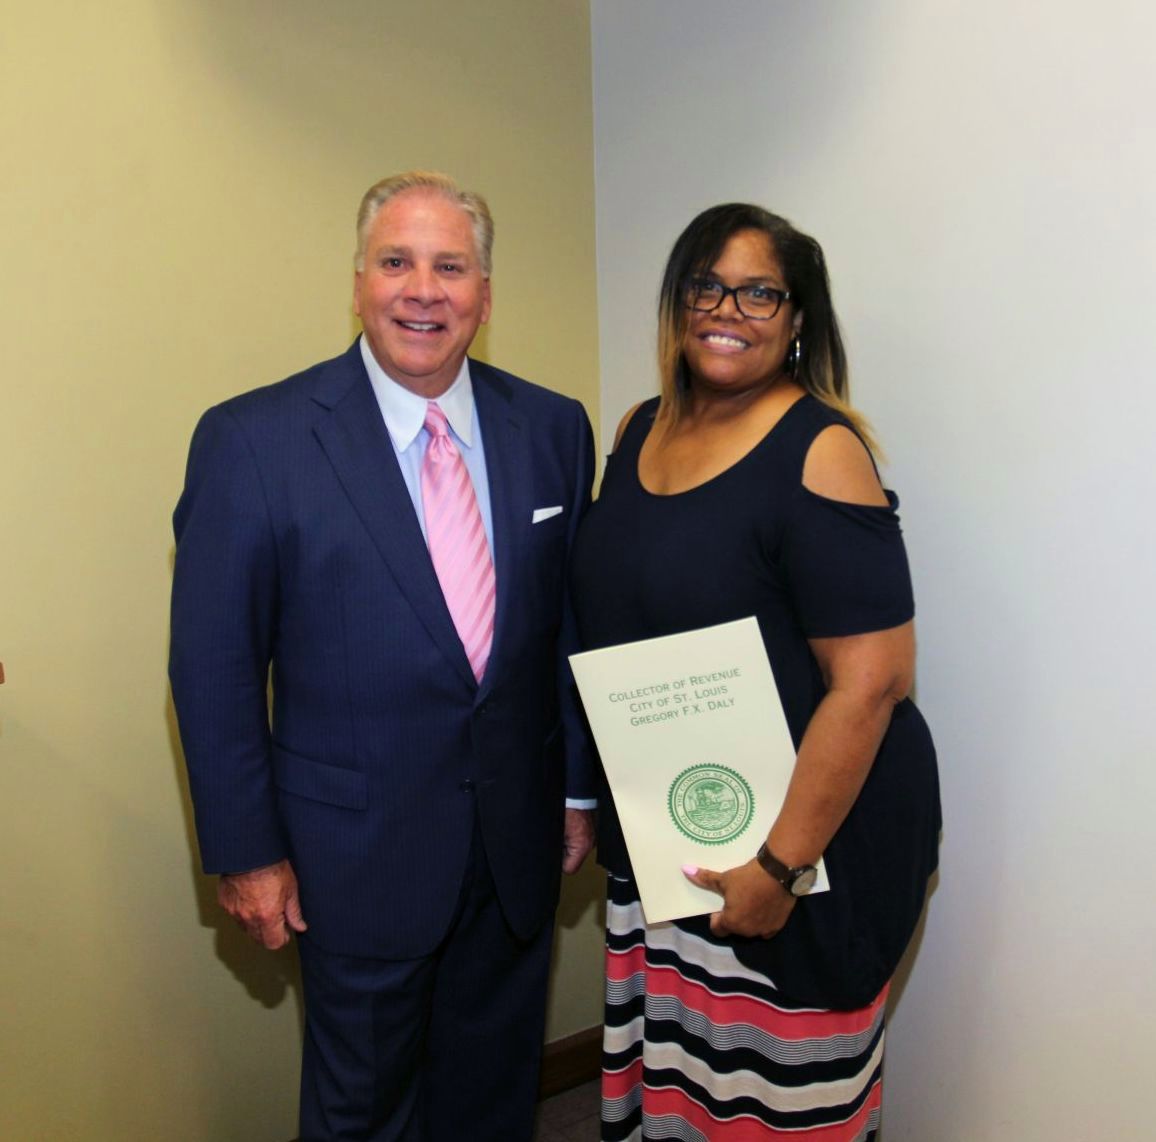 Collector of Revenue Gregory F.X. Daly congratulates Barbara Scales on 5 years of service in the Collector's Office.